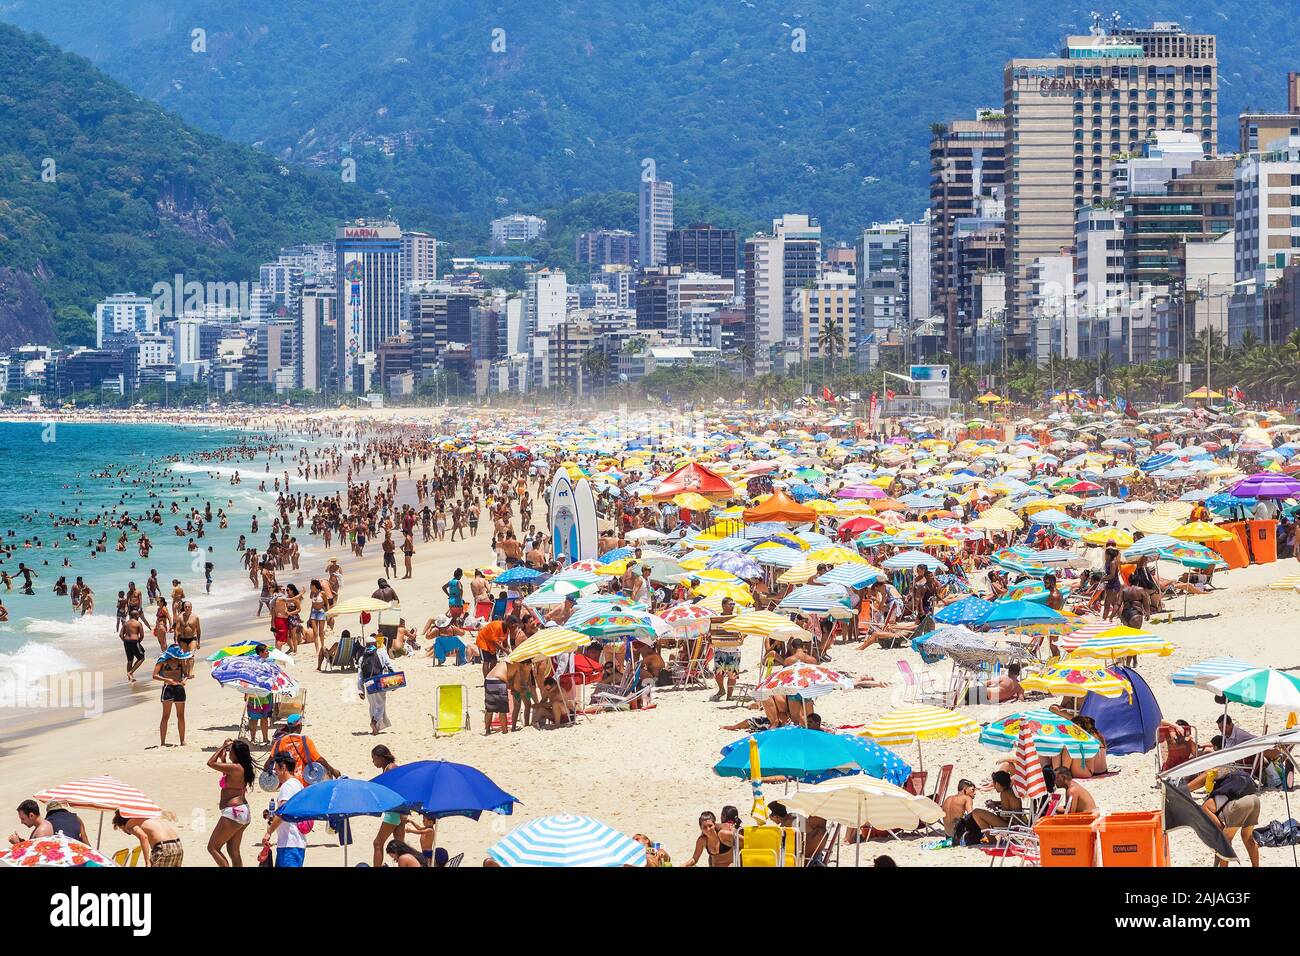 Tourists and locals enjoying the summer at famous Ipanema beach in Rio de Janeiro, Brazil. Stock Photo